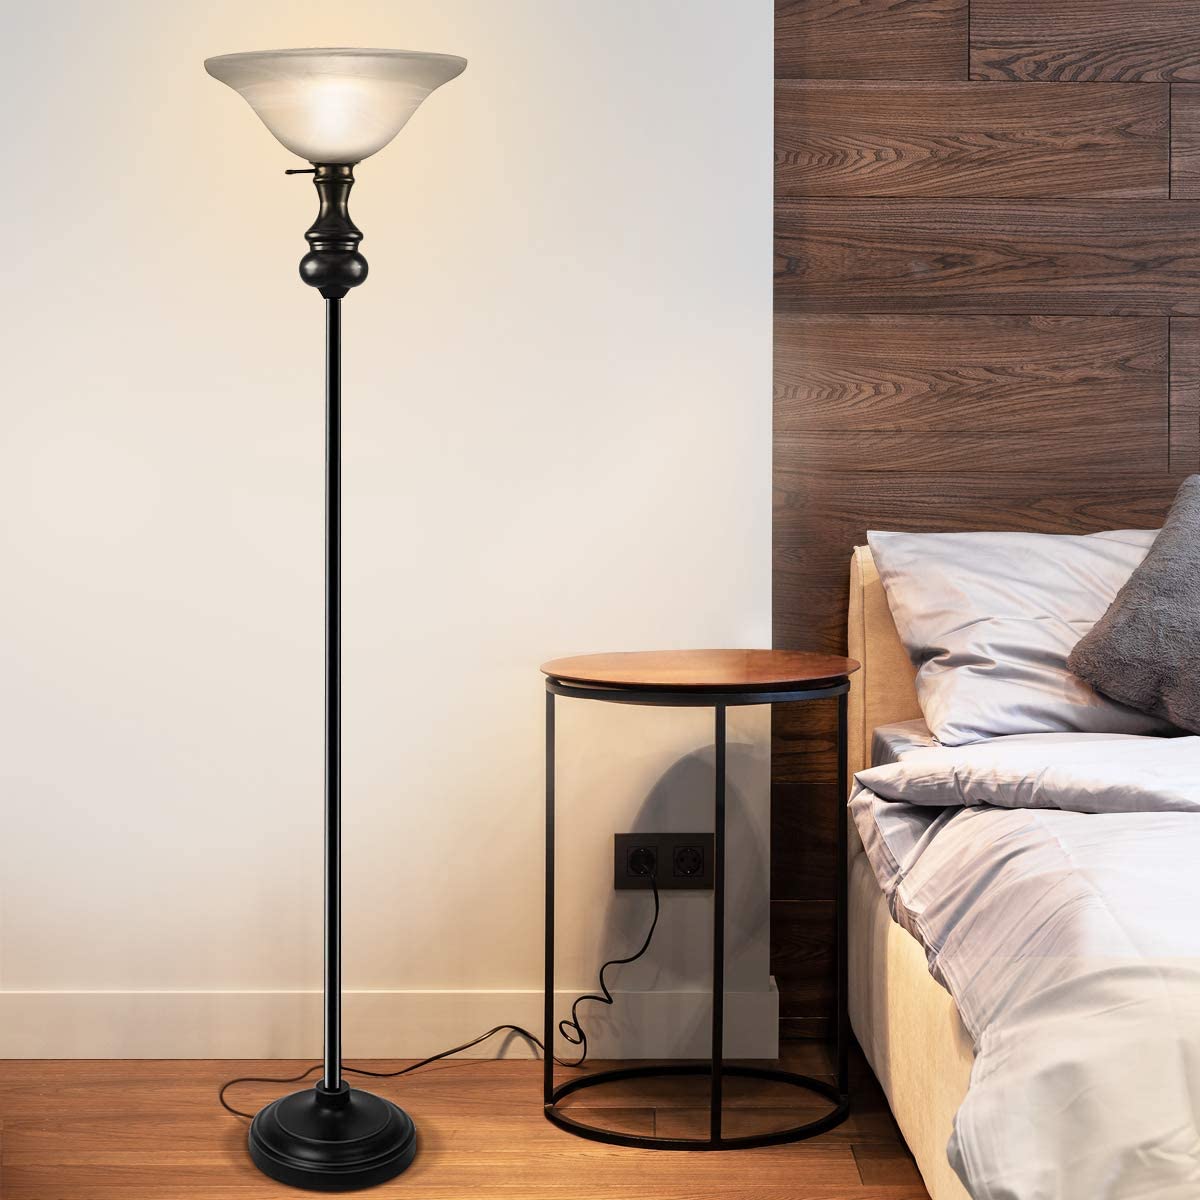 On each Modern Shirley Torchiere Floor Lamp 15 Unique Artistic Floor Lamps to Light Your Bedroom - 6